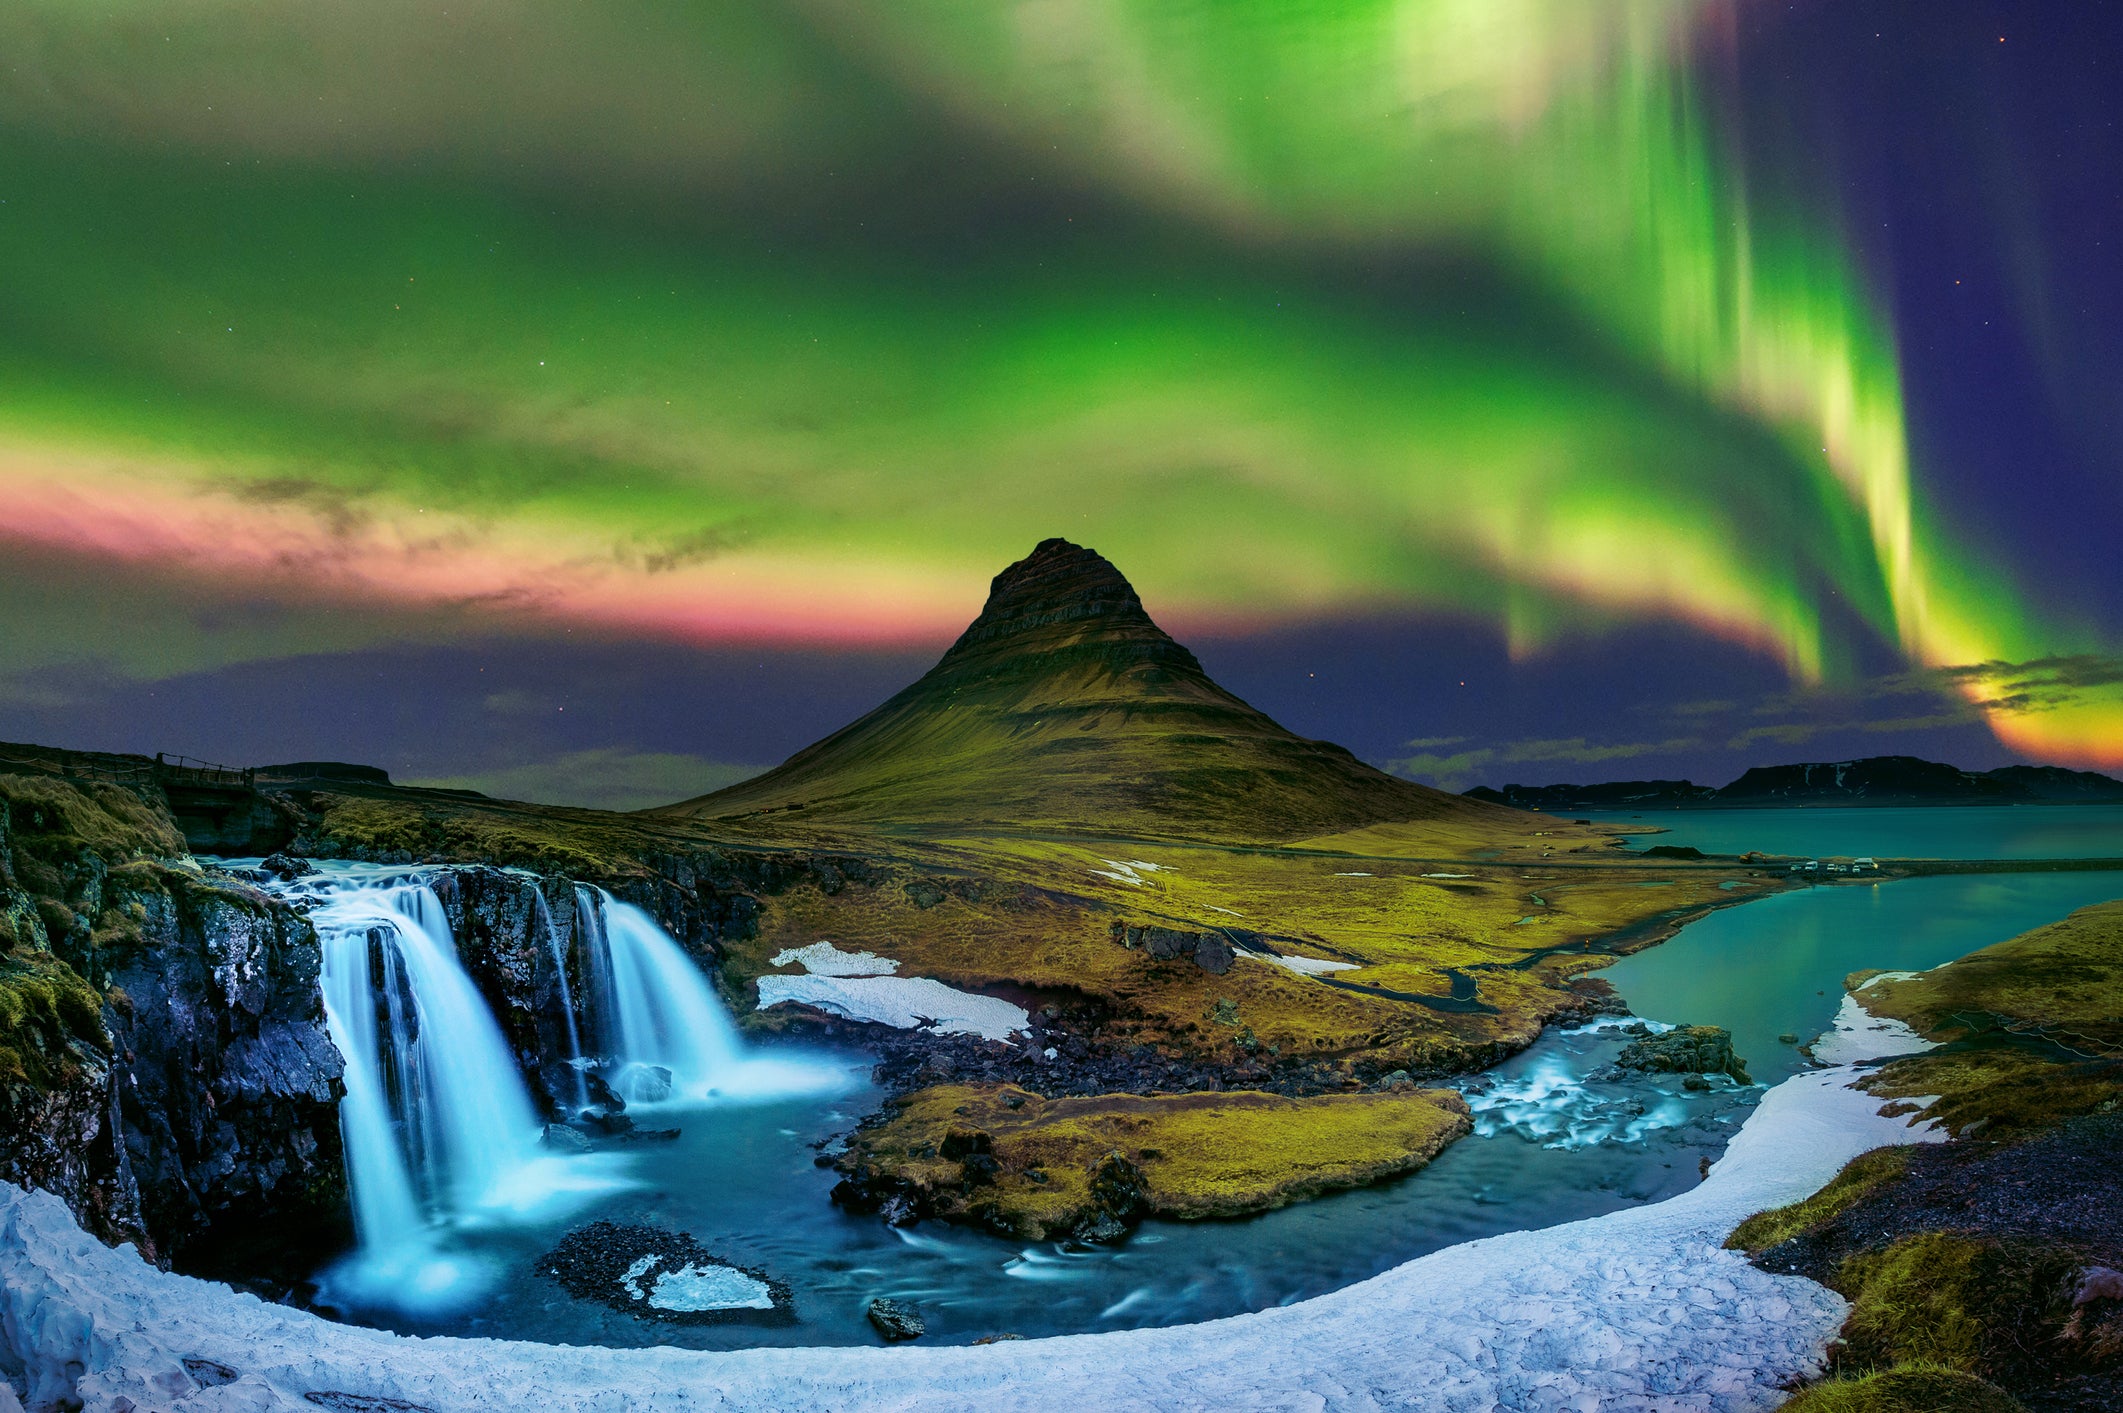 Kirkjufell mountain is a popular spot for viewing the Northern Lights